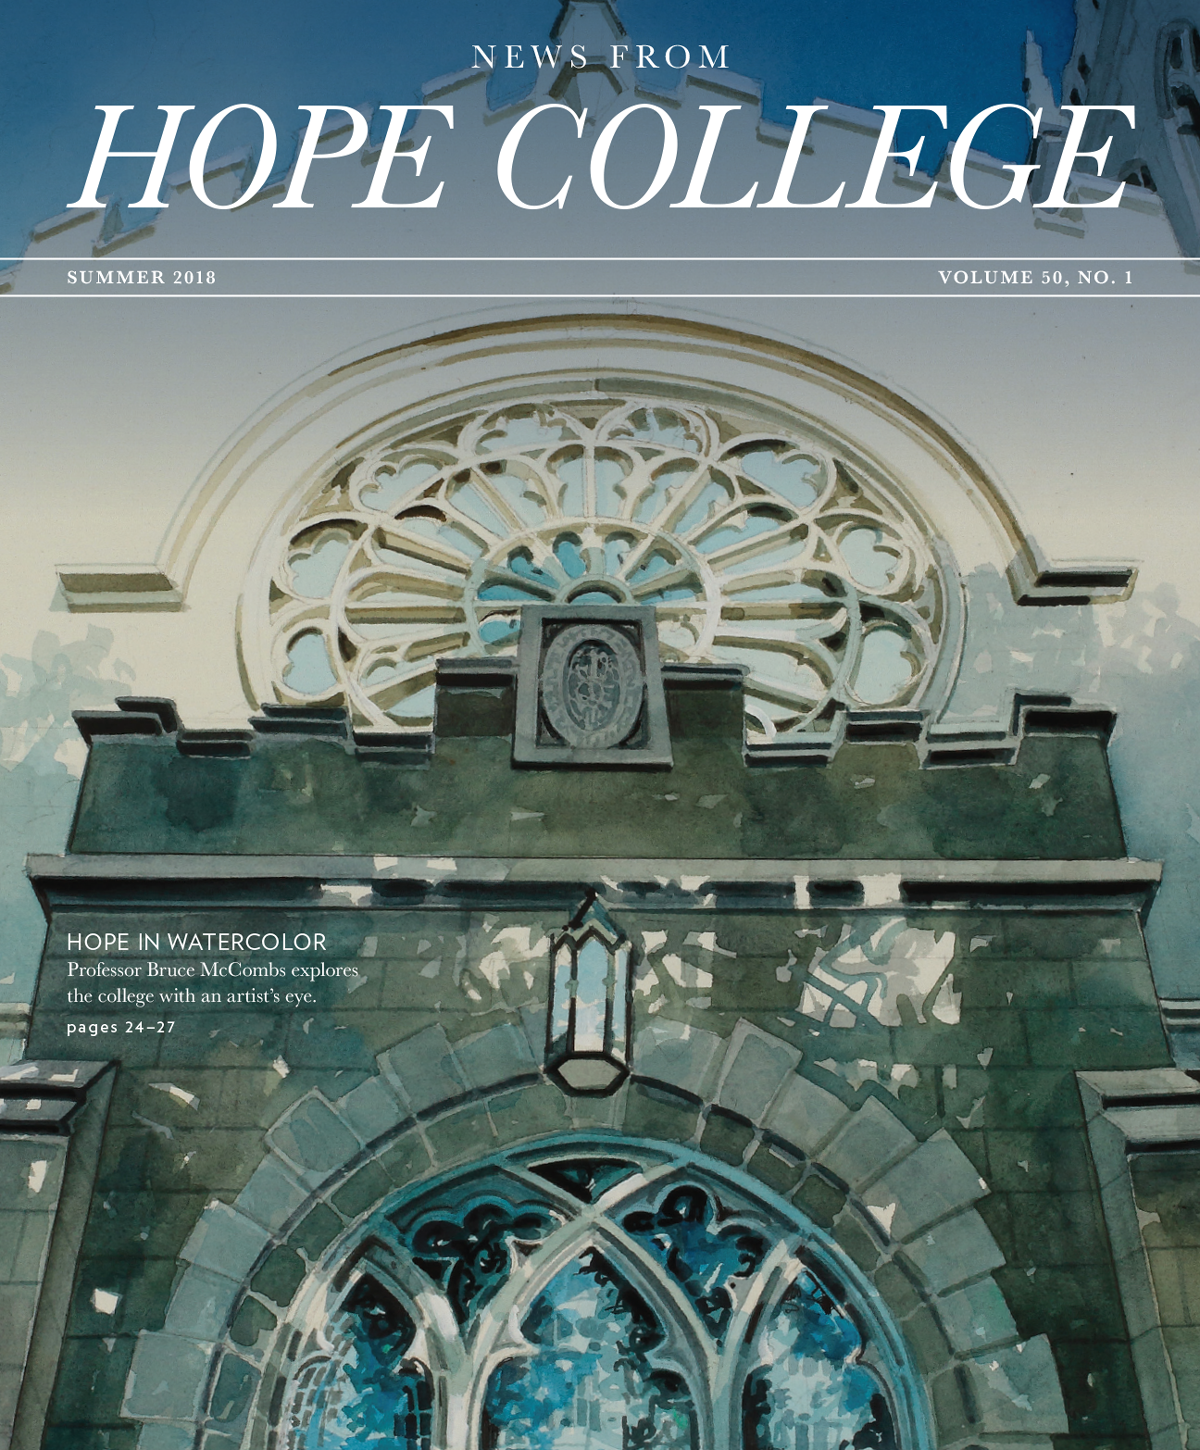 Cover of Summer 2018 issue of News from Hope College magazine